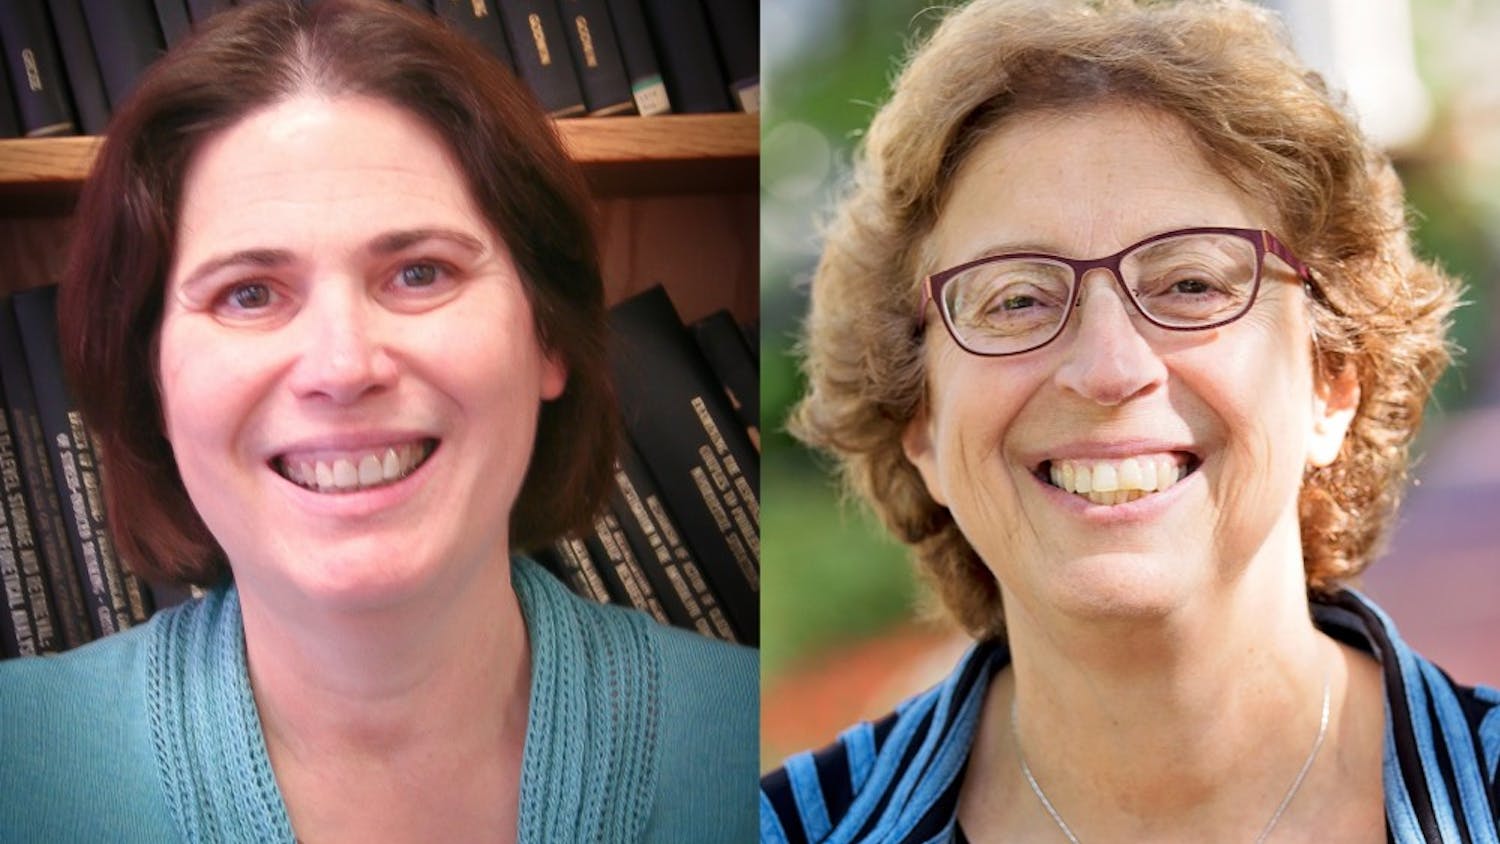 Amy Holtzworth-Munroe, left, and Amy Applegate, right, won IU’s Outstanding Faculty Collaborative Research Award for their research in divorce mediation. The two researchers earned a $15,000 research grant as part of the award.